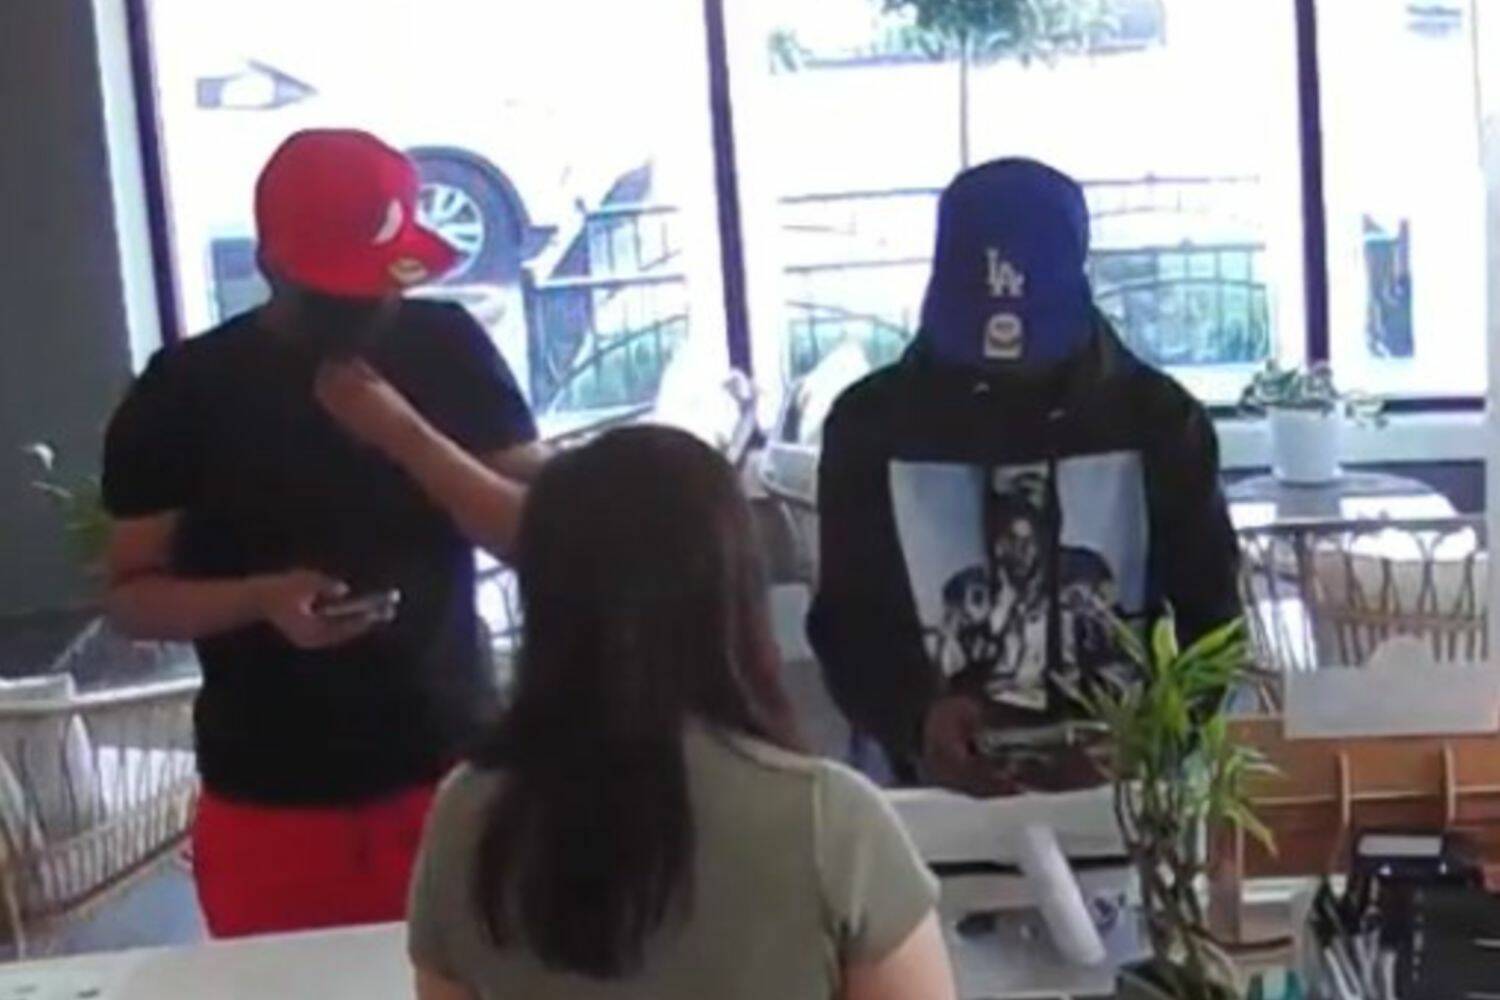 Scam suspects caught on security video in Downtown Renton. Screenshot from Renton Police Facebook post